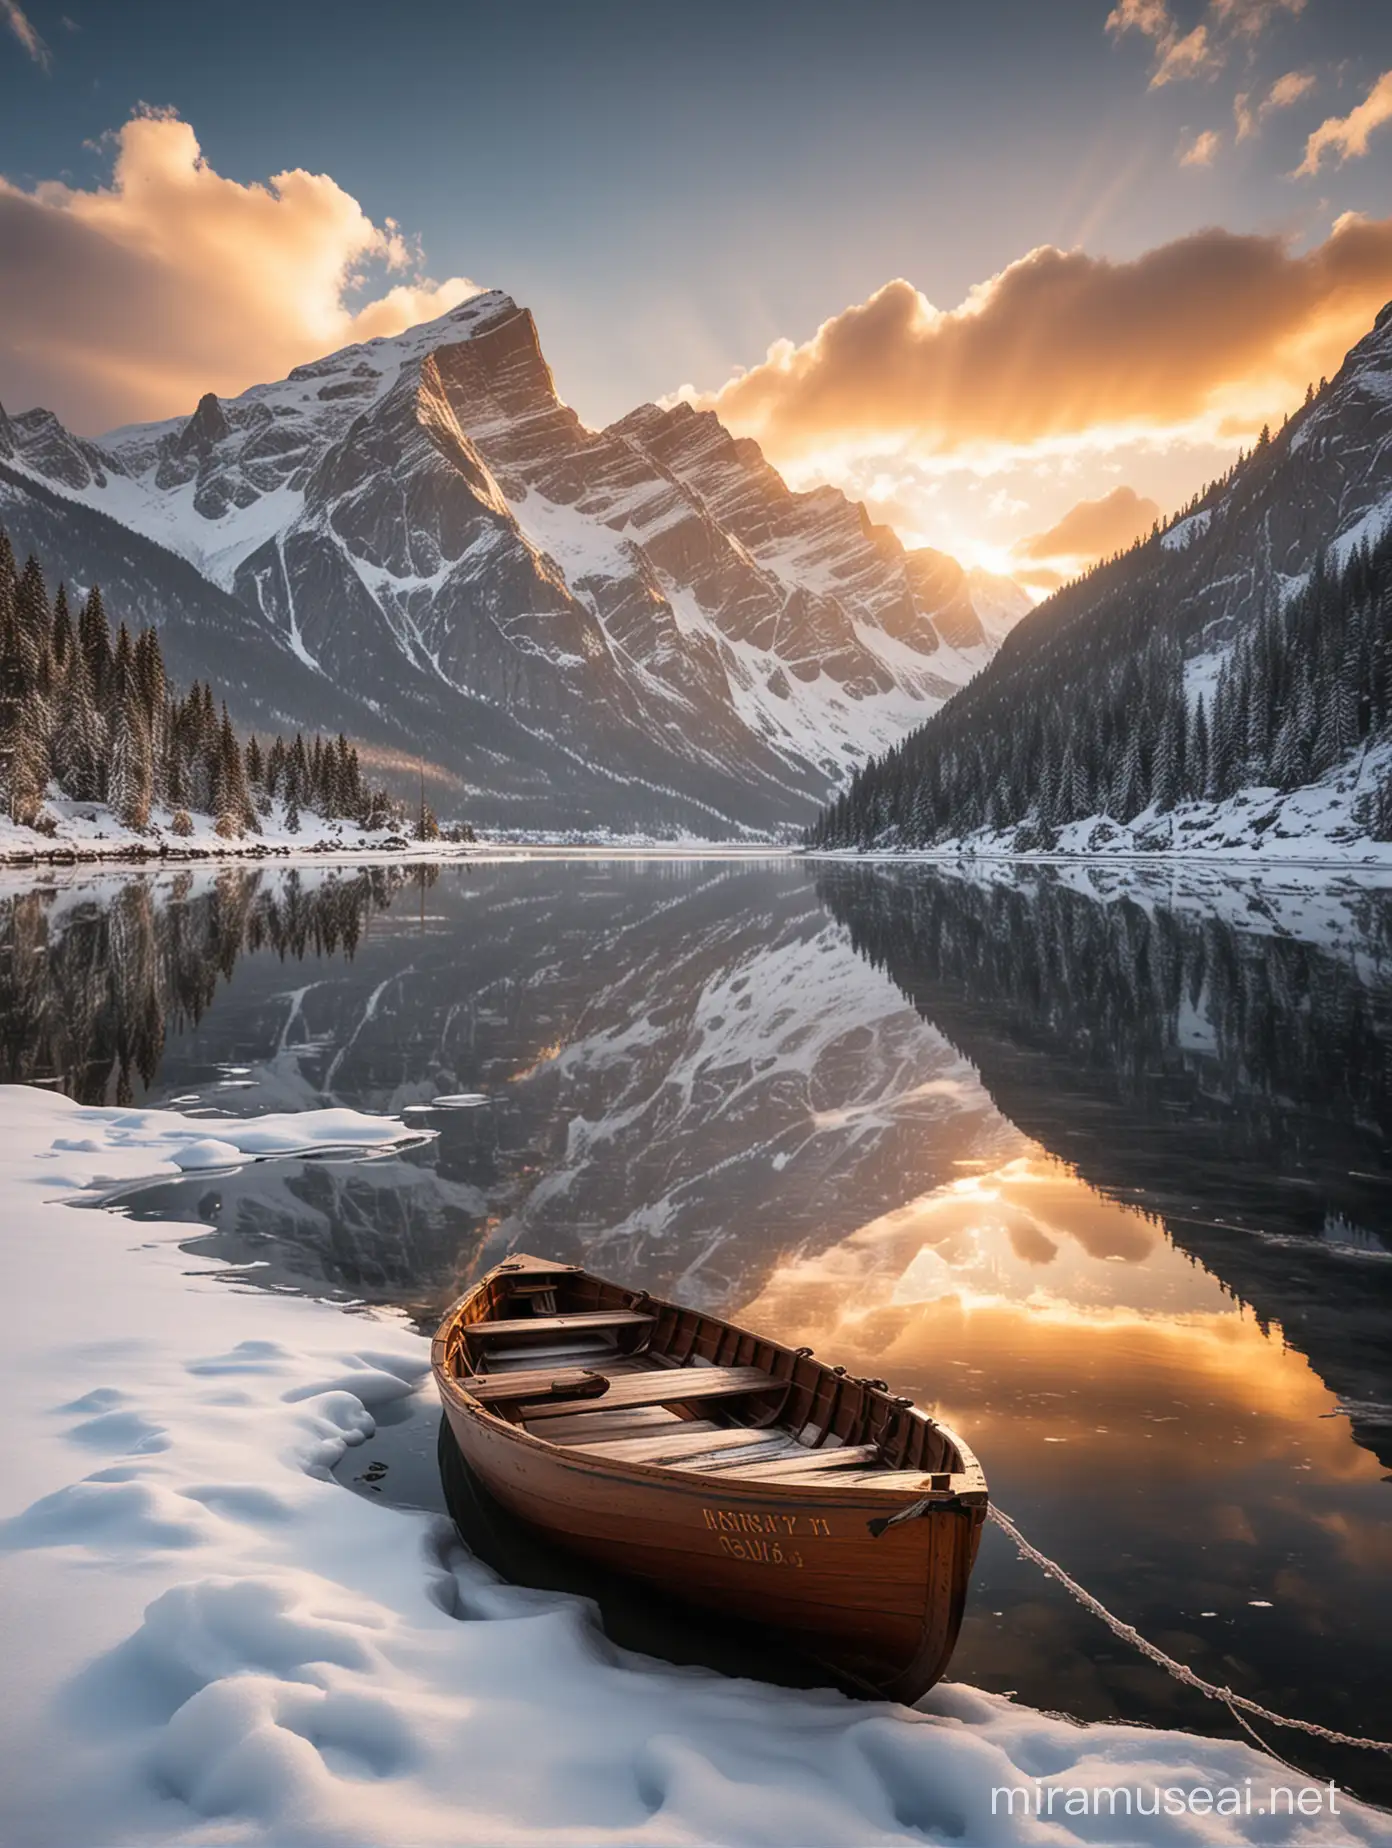 Tranquil Winter Landscape Wooden Boat on Frozen Lake with SnowCapped Mountains